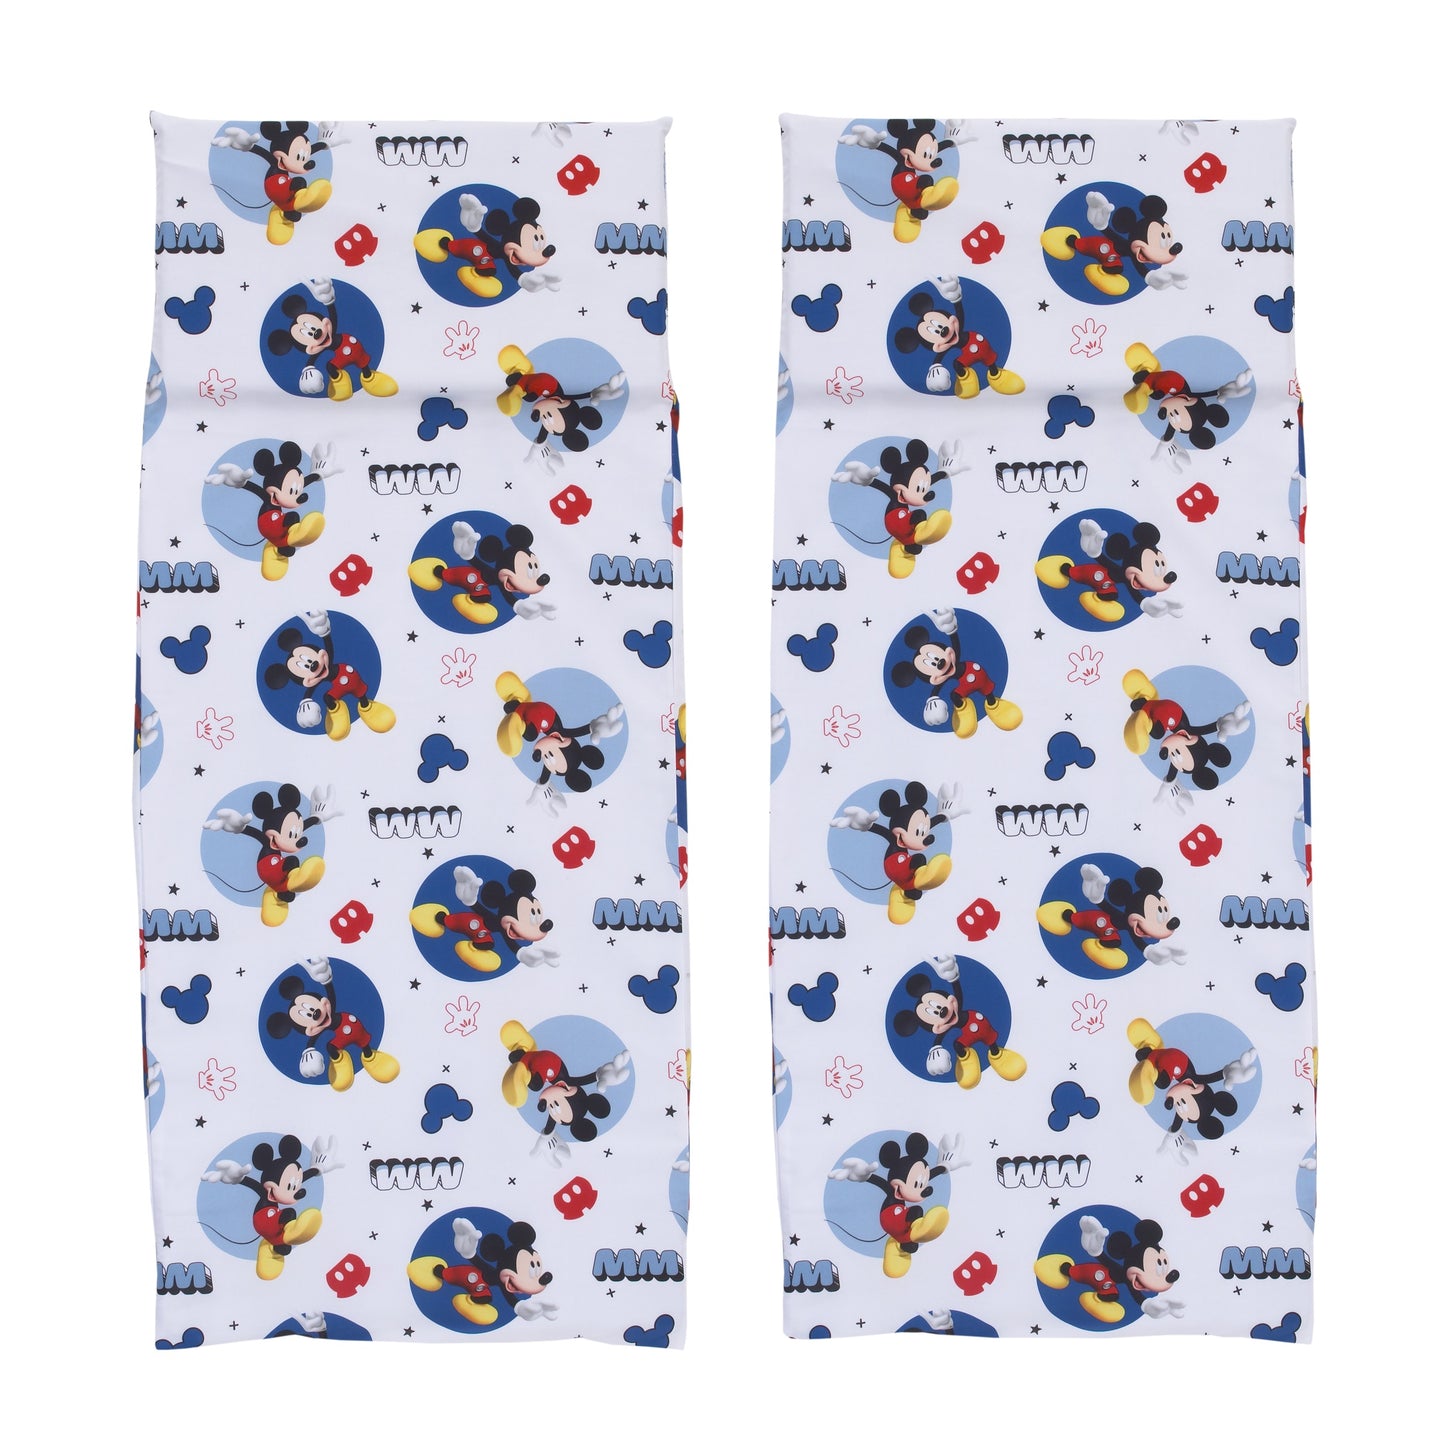 Disney Mickey Mouse - Navy, White, and Red 2 Pack Preschool Nap Pad Sheets